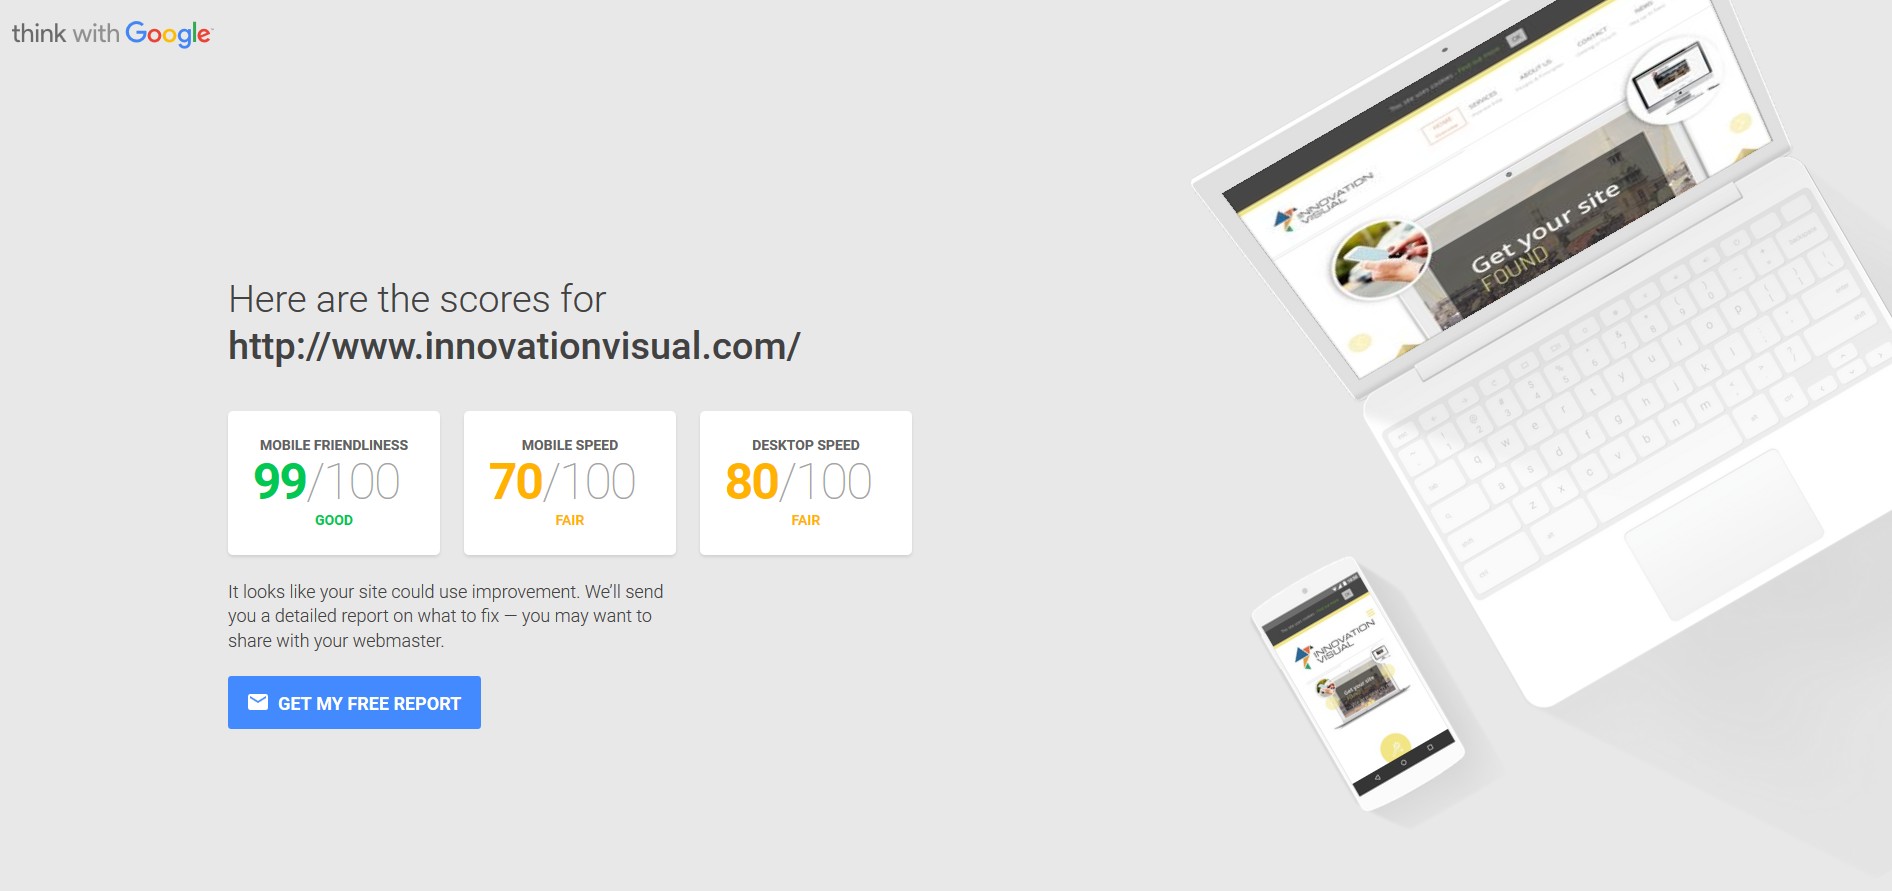 innovation visual website - mobile and speed insights from think with google test tool